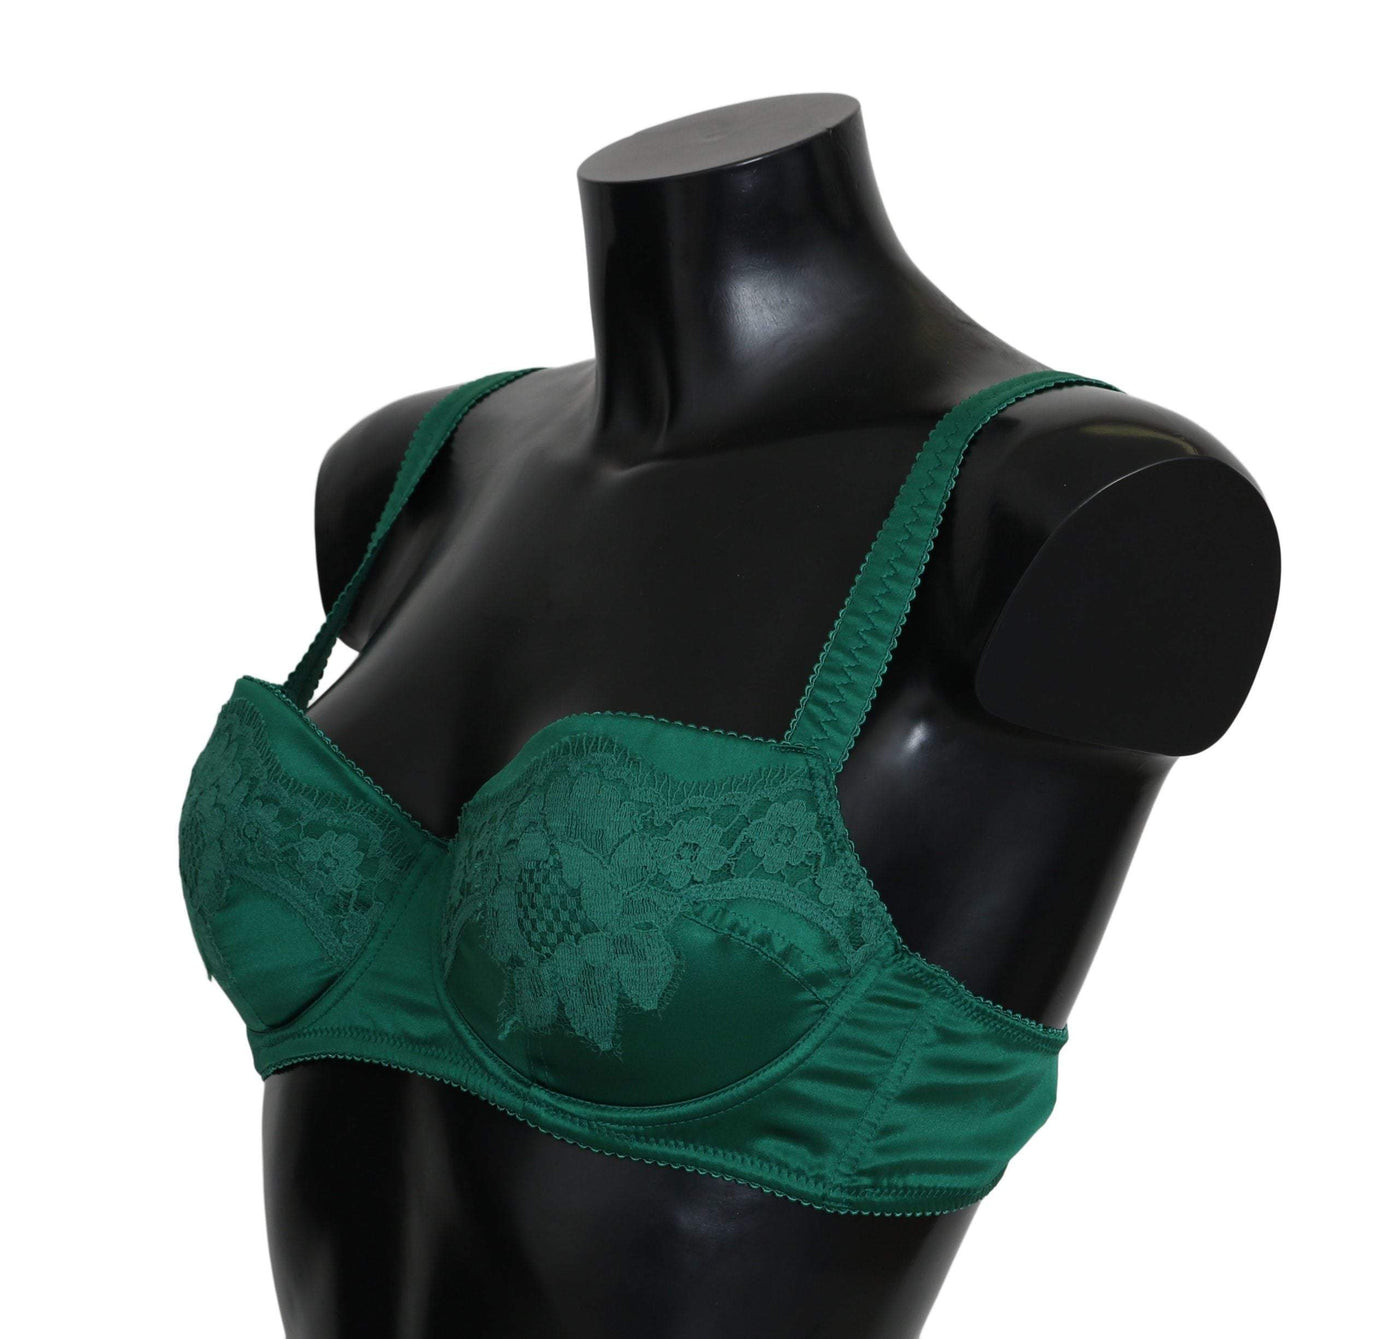 Dolce & Gabbana Green Silk Stretch Floral Lace Bra Underwear #women, Brand_Dolce & Gabbana, Catch, Dolce & Gabbana, feed-agegroup-adult, feed-color-green, feed-gender-female, feed-size-IT1 | XS, feed-size-IT2 | S, feed-size-IT3 | M, Gender_Women, Green, IT1 | XS, IT2 | S, IT3 | M, IT4 | L, Kogan, Underwear - Women - Clothing, Women - New Arrivals at SEYMAYKA